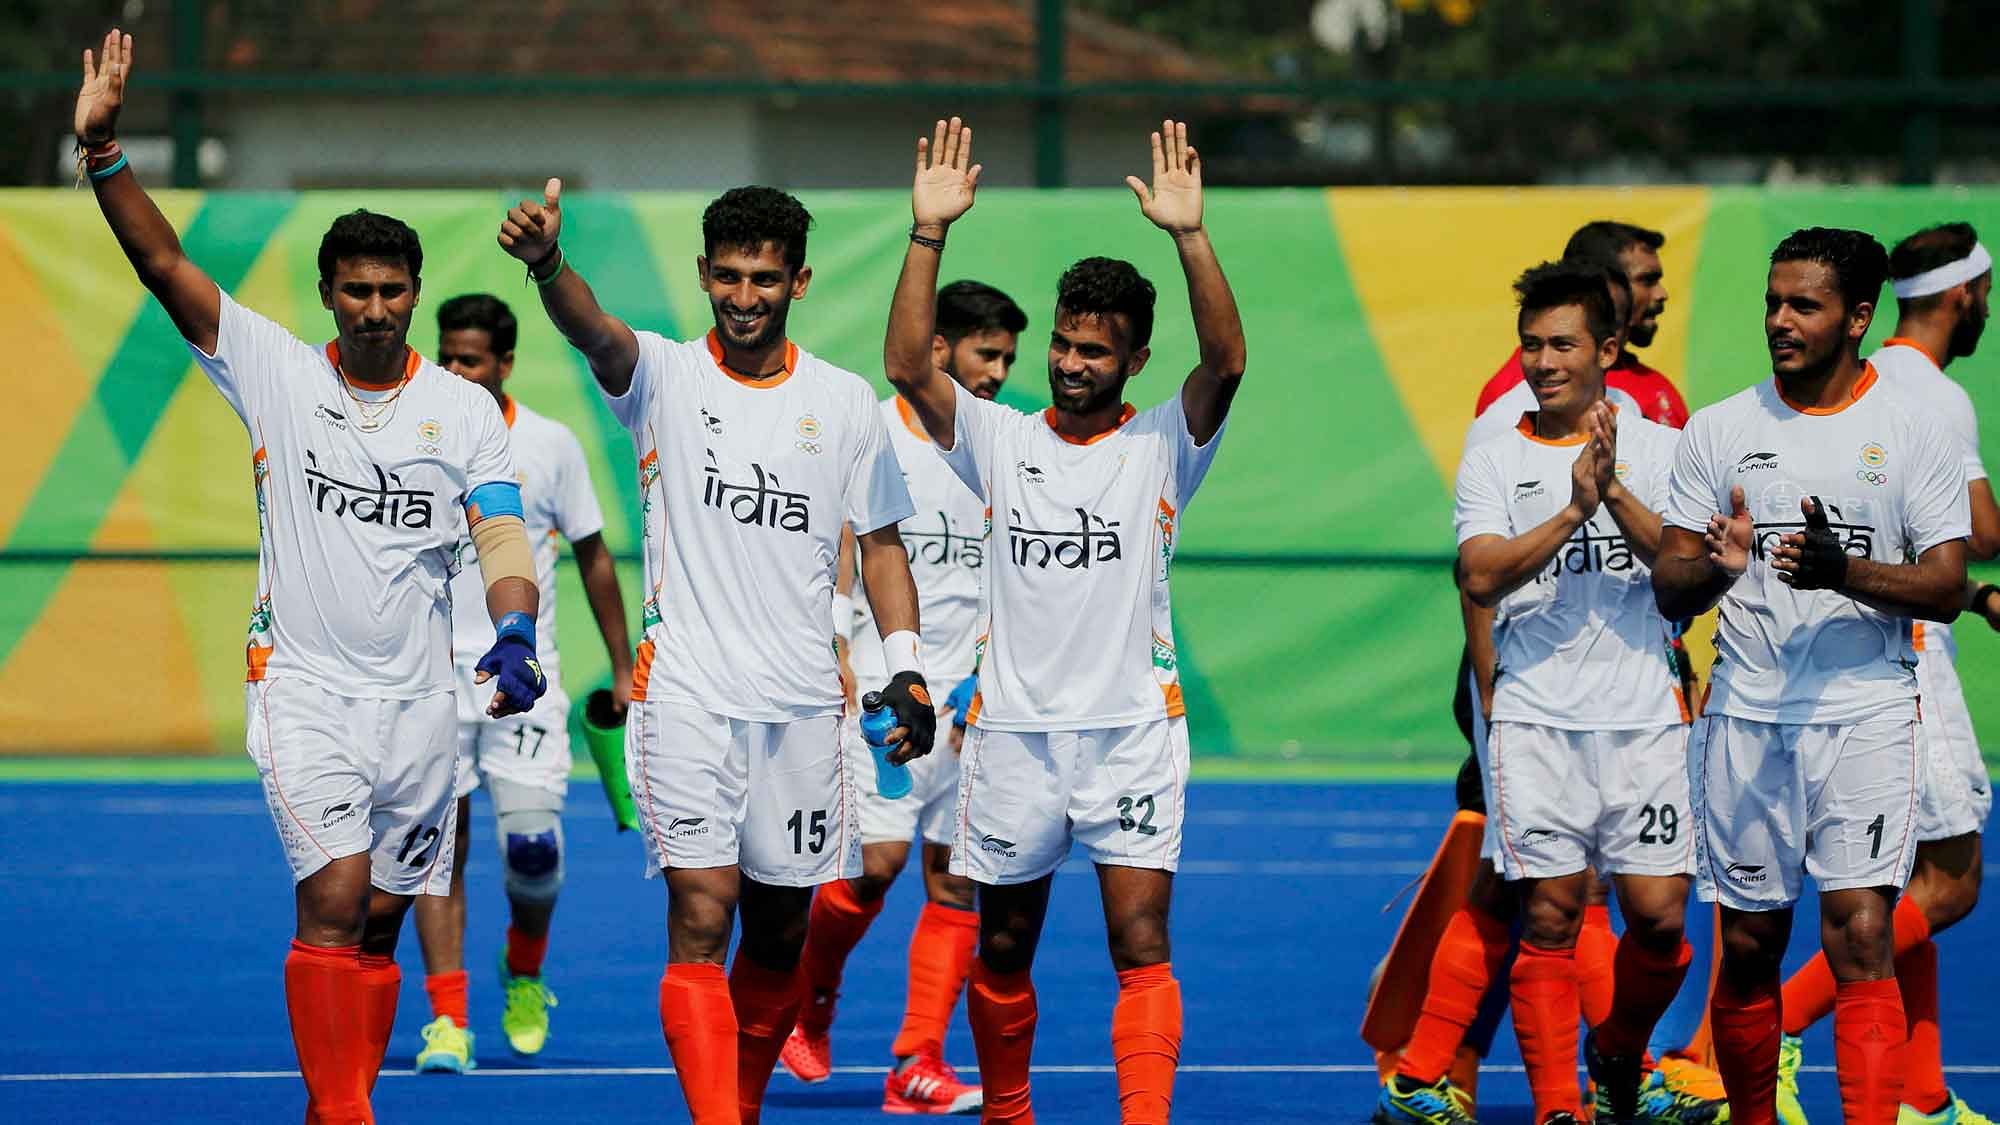 The Indian team (Photo: Reuters)